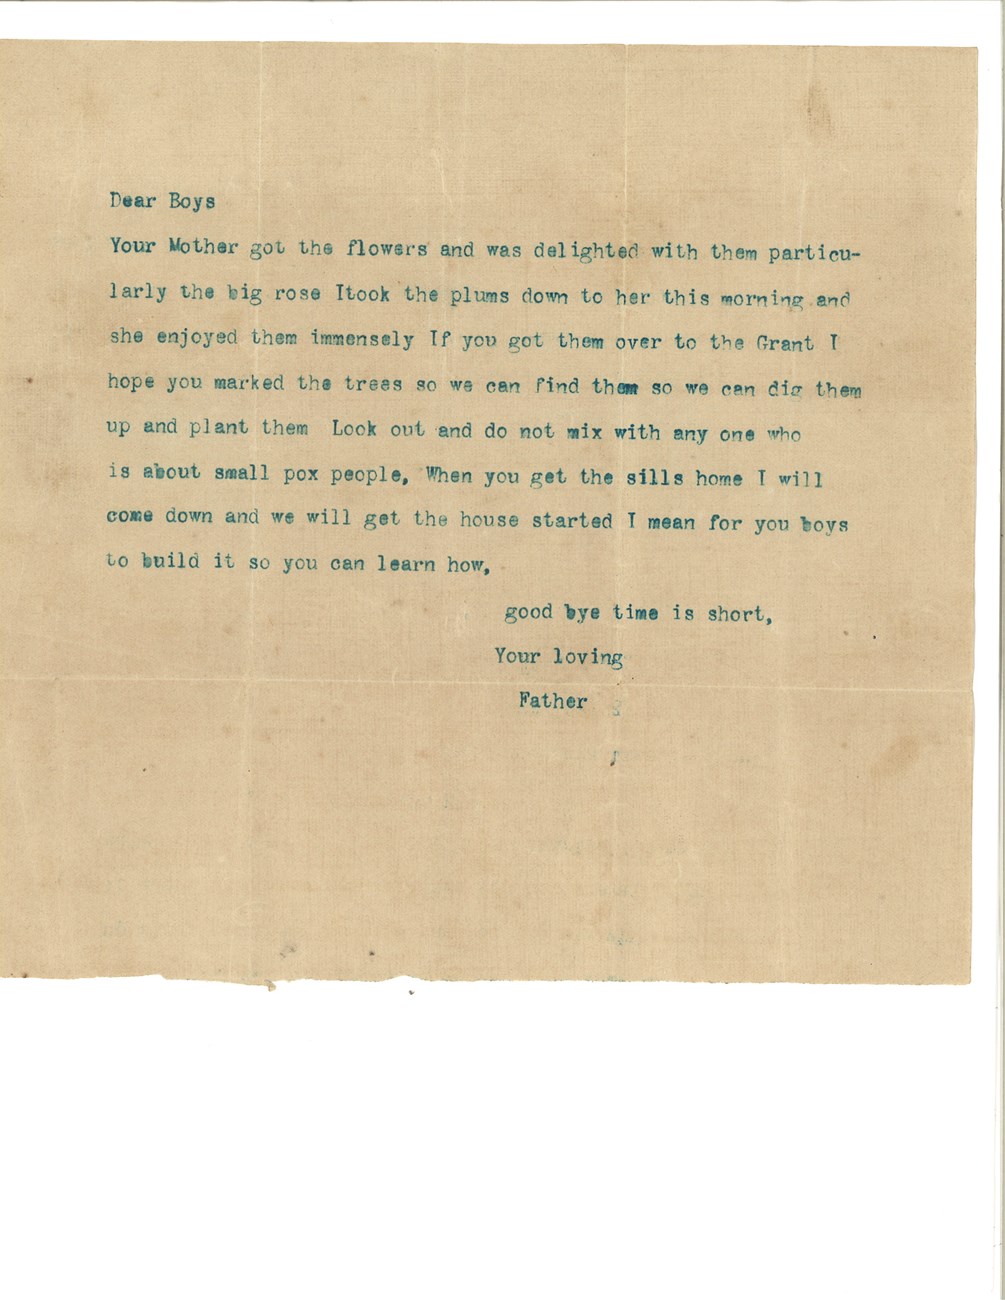 Letter between father and sons discusses mother getting the flowers, plum trees, and small pox.  Typed on typewriter.